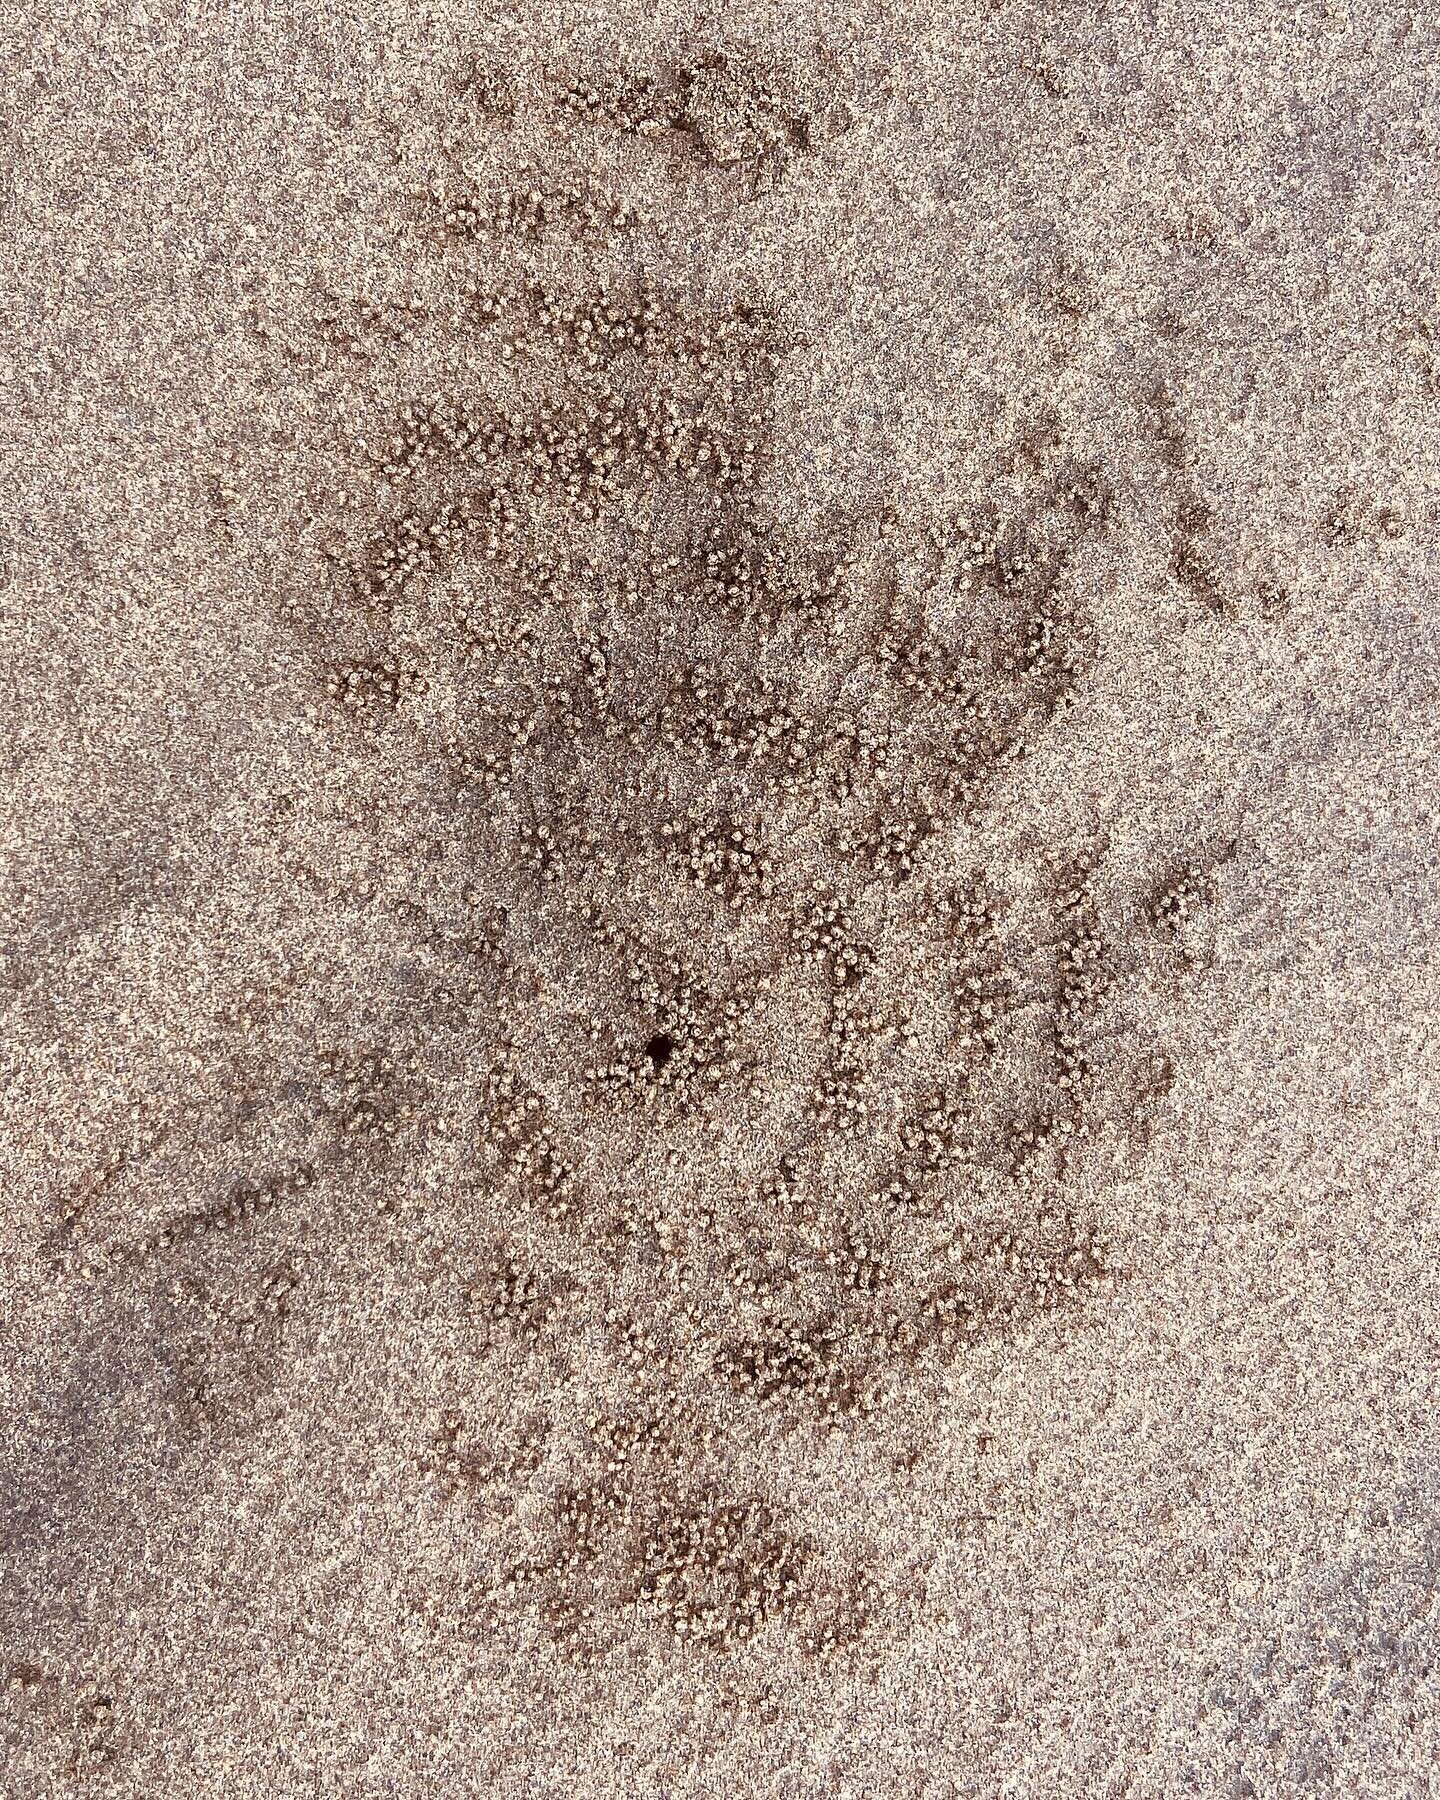 Beach crop circles!! Ok I know these photos aren&rsquo;t the easiest to see but I&rsquo;ve spent endless hour over the 25 years I&rsquo;ve come to his beach watching the little crabs who make these exquisite little designs in the sand. Each day the d